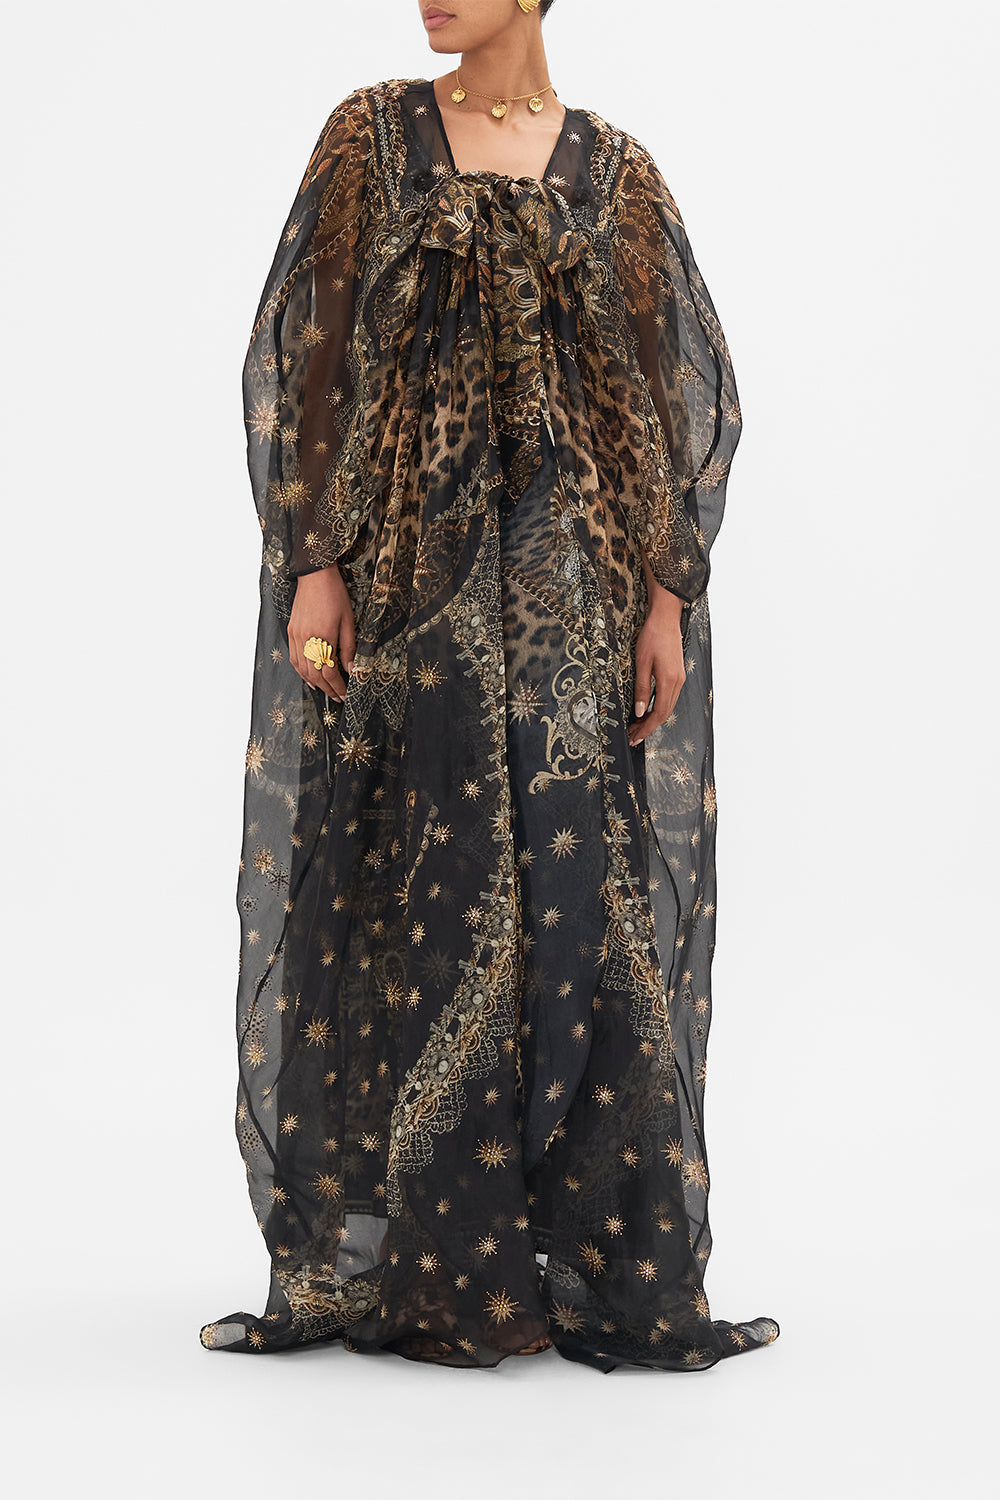 Front view of CAMILLA silk kimono layer black in Masked Moonlight print